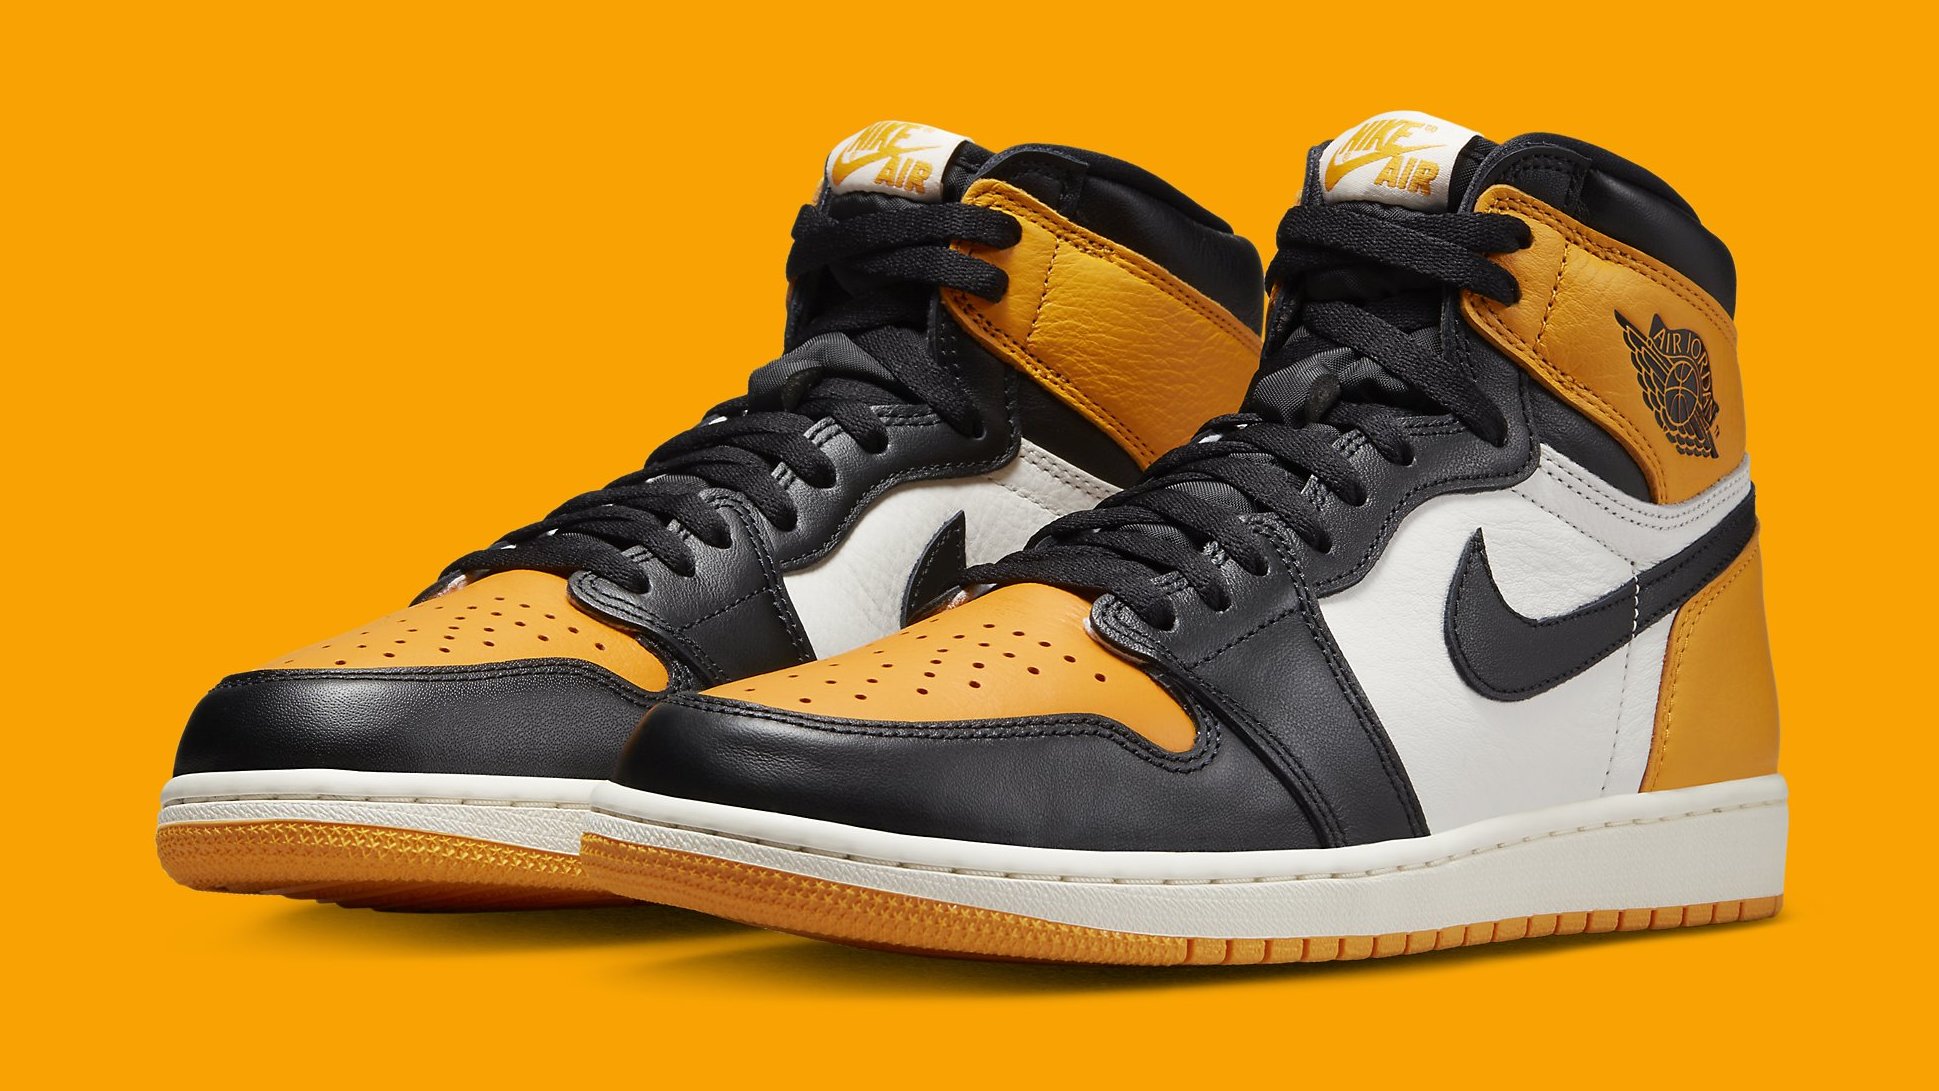 Taxi' Air Jordan 1s Are Finally Being Released | Complex